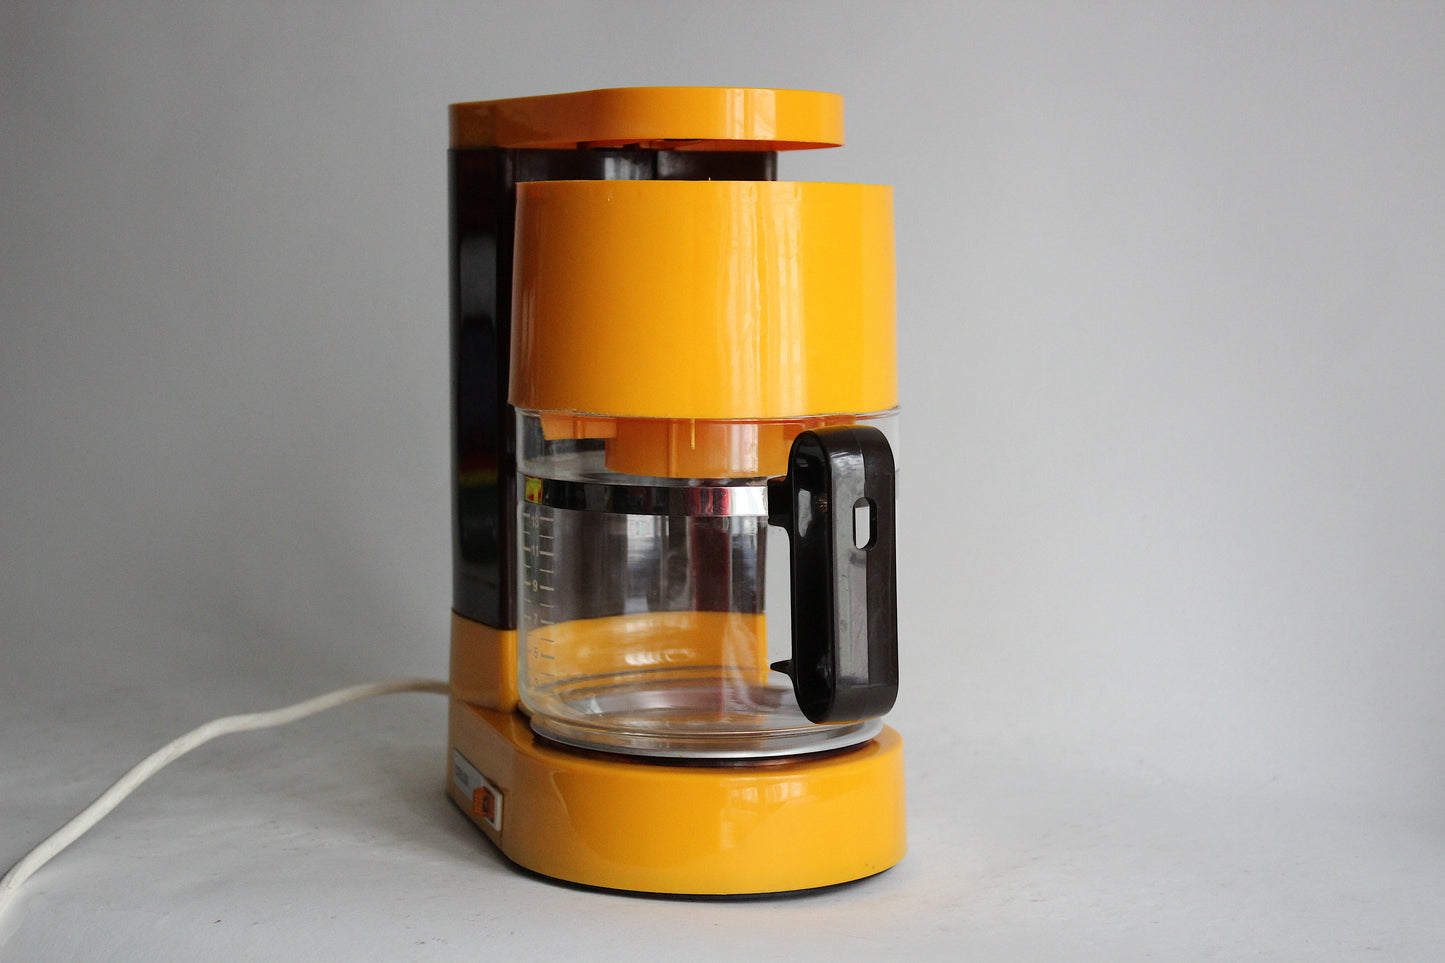 Filter Coffee Maker CALOR 1000 Orange. French 70s Space Age Coffee Maker.